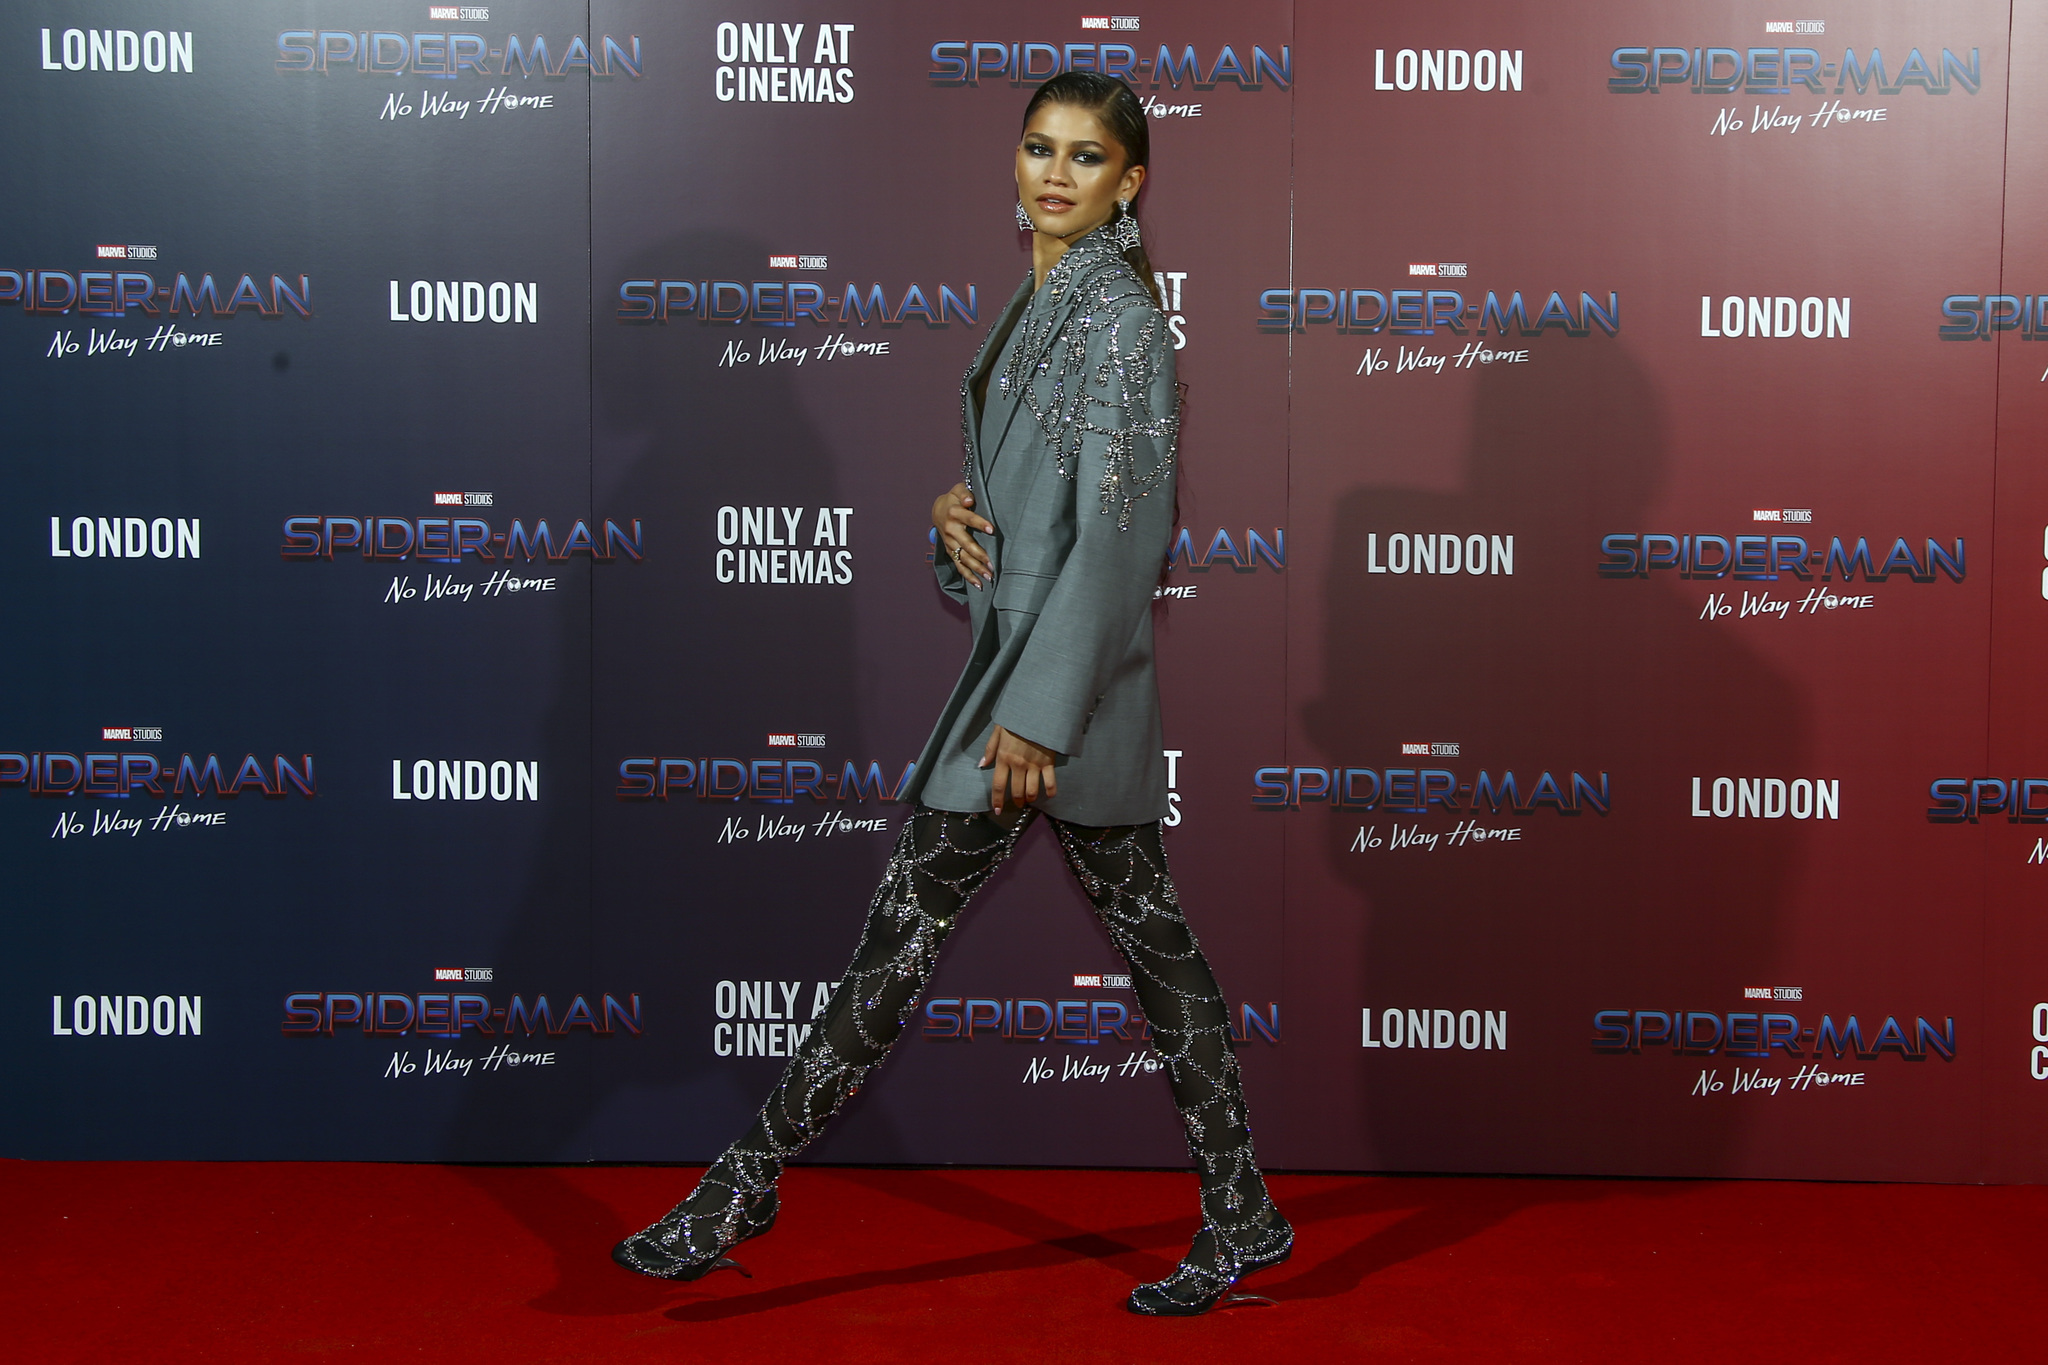 Zendaya poses at the photo call for the film 'Spider-Man: No Way Home' in London.